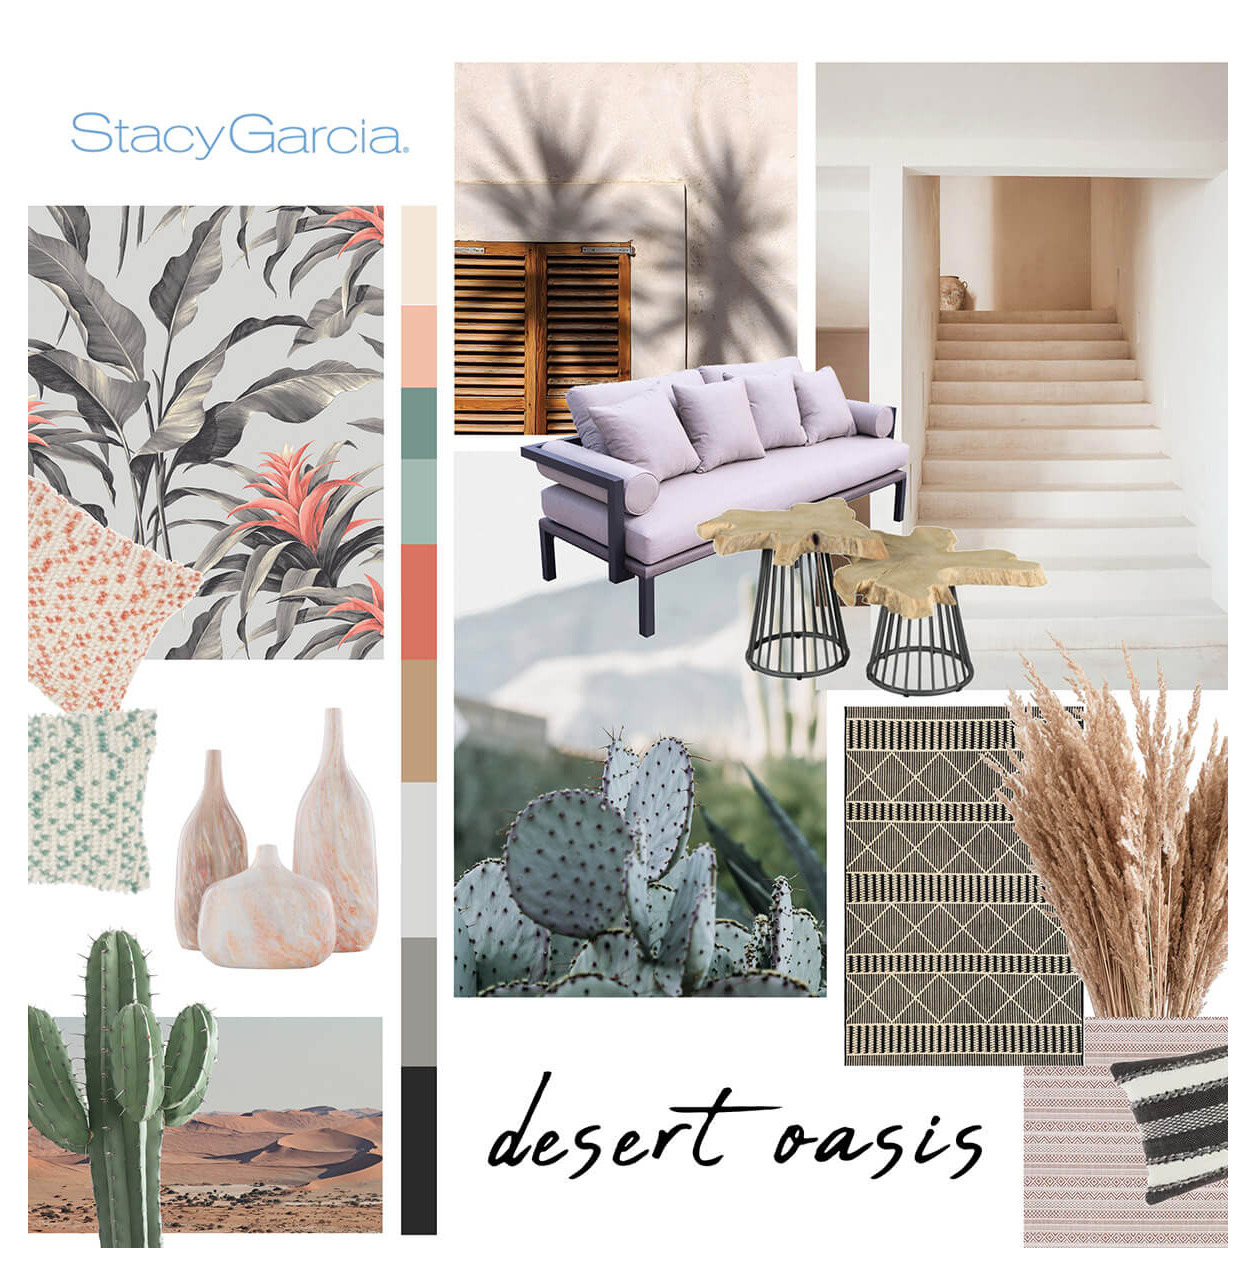 "Desert oasis" was the driving inspiration behind this outdoor inspiration by Stacy Garcia, Inc. 